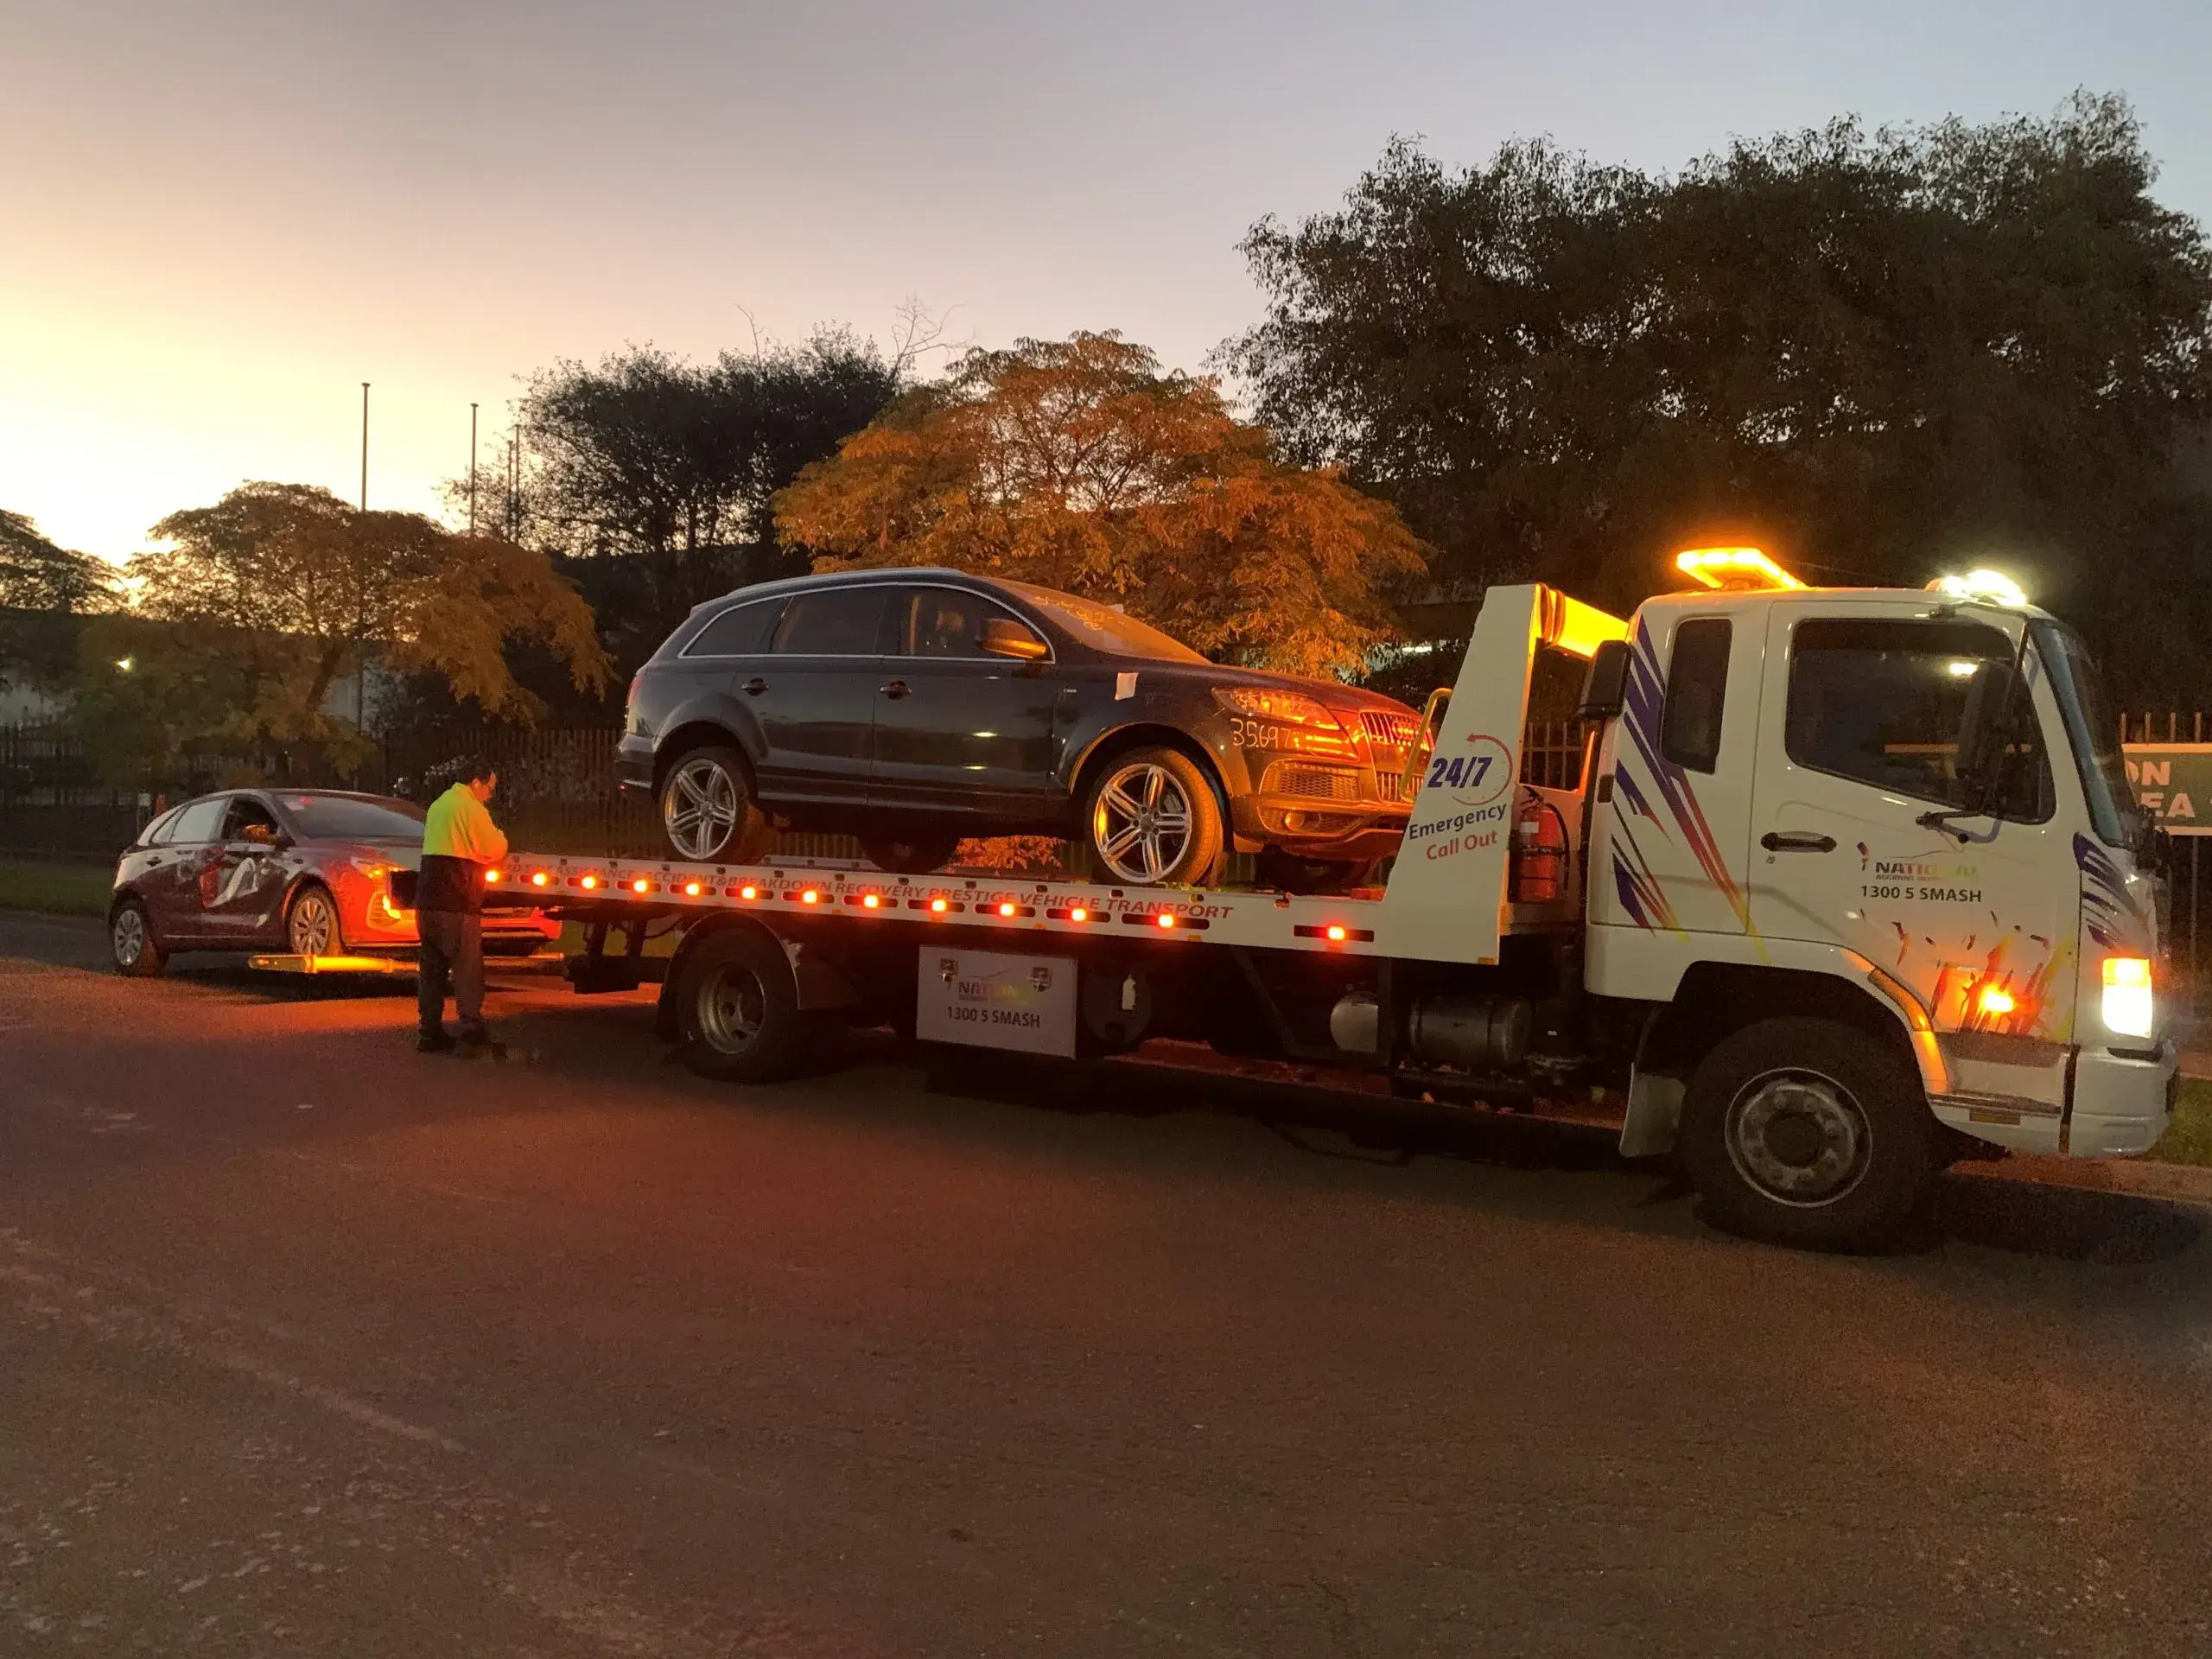 call maningham towing anytime for professional 24 hour tow truck service in melbourne